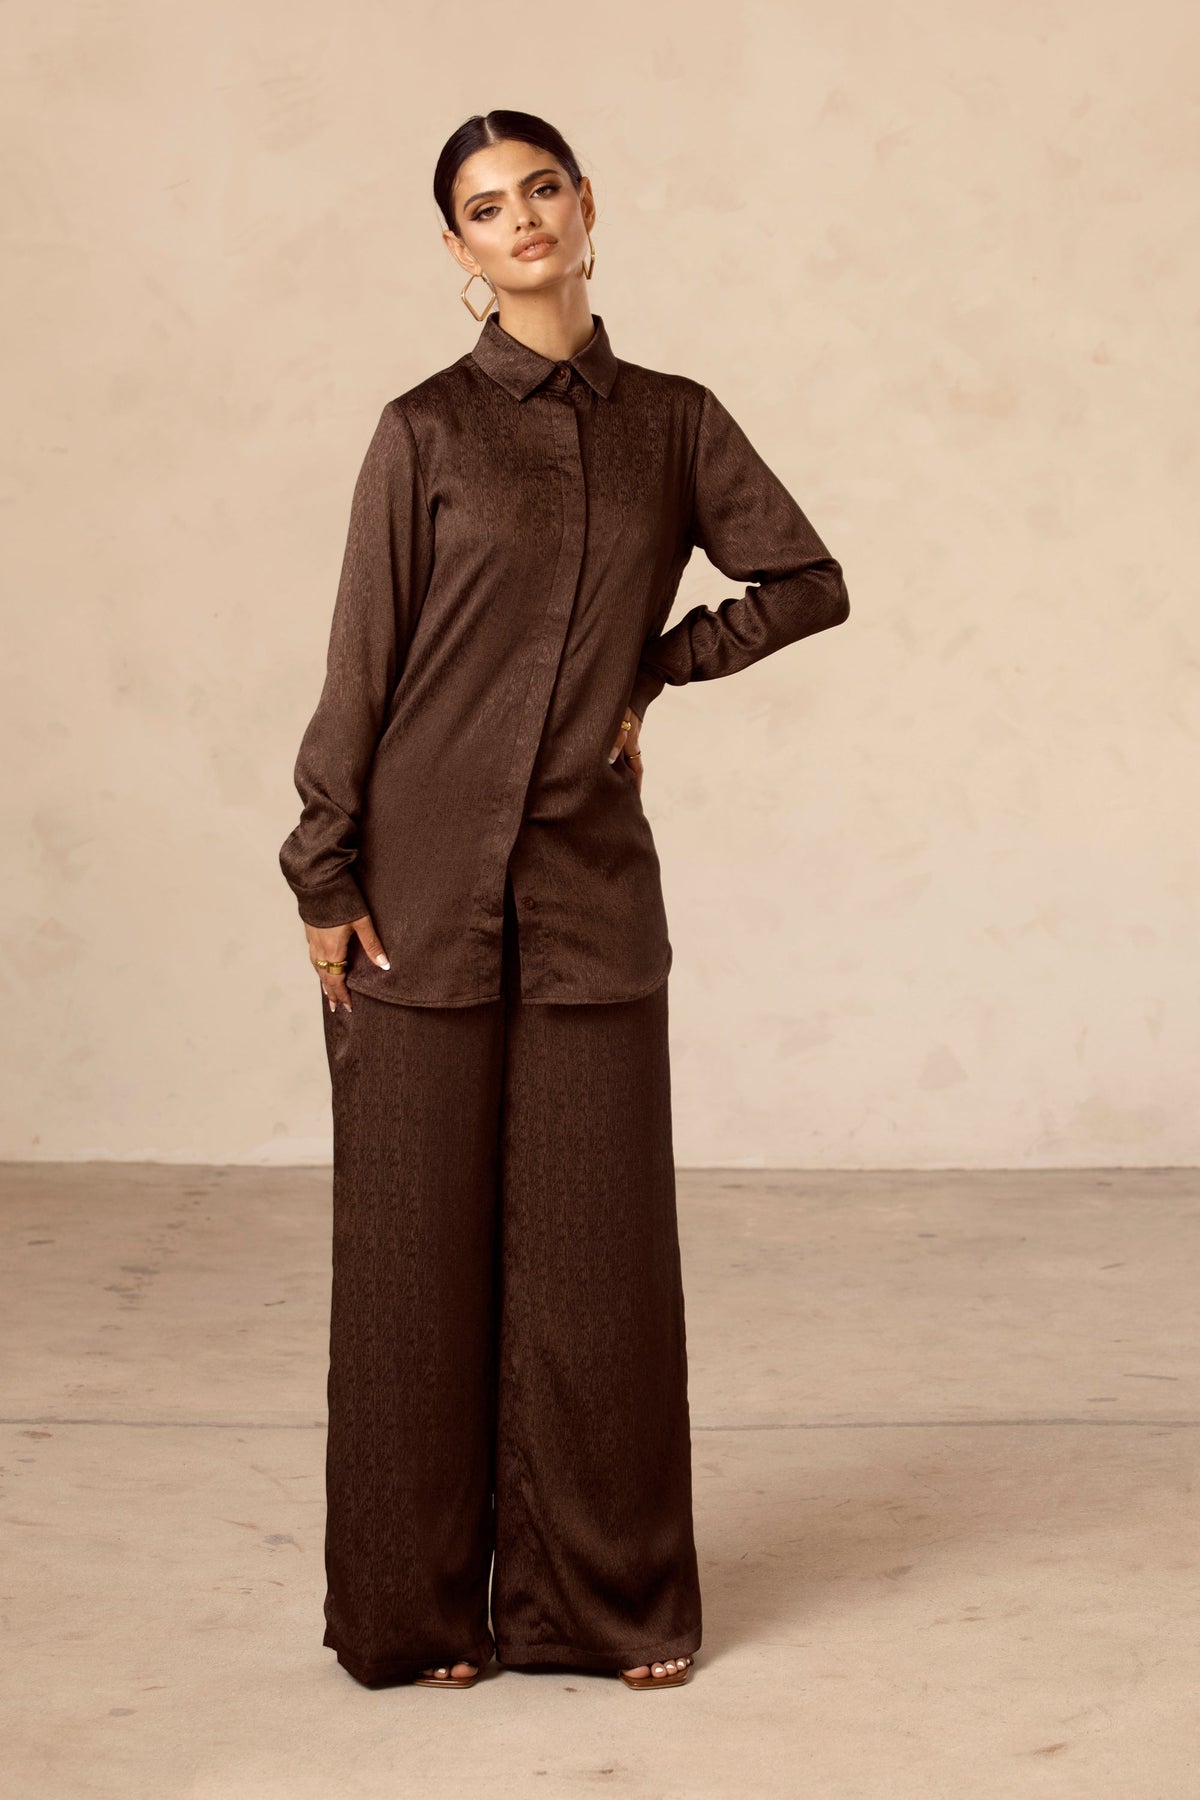 Nara Textured Wide Leg Pants - Espresso Brown Veiled Collection 